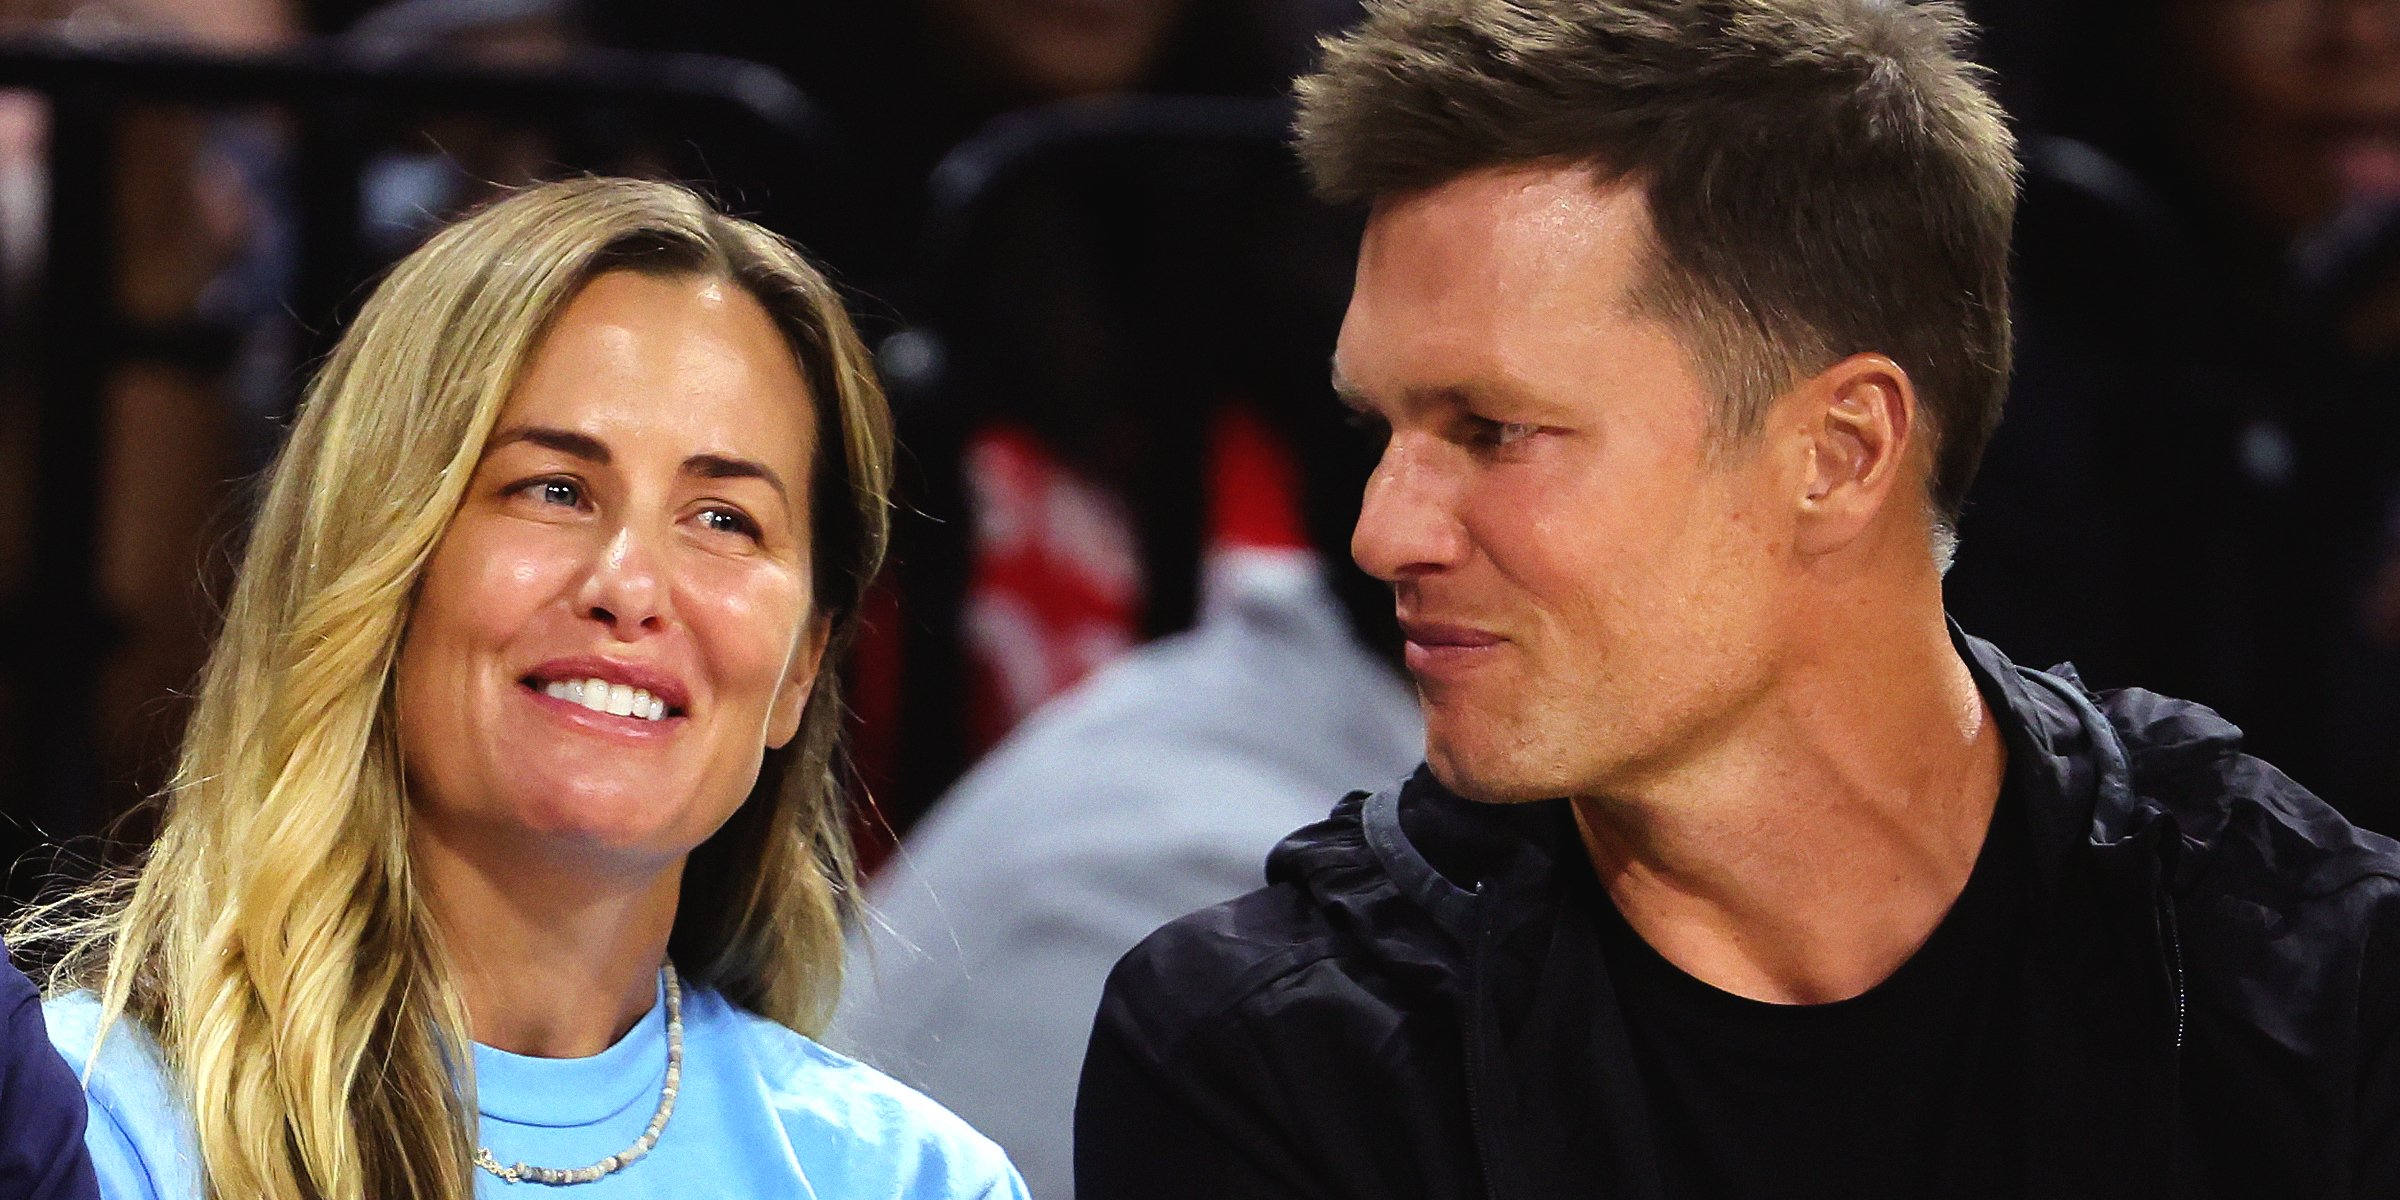 Siblings Julie and Tom Brady Photographed While Watching a Game Together | Source: Getty Images